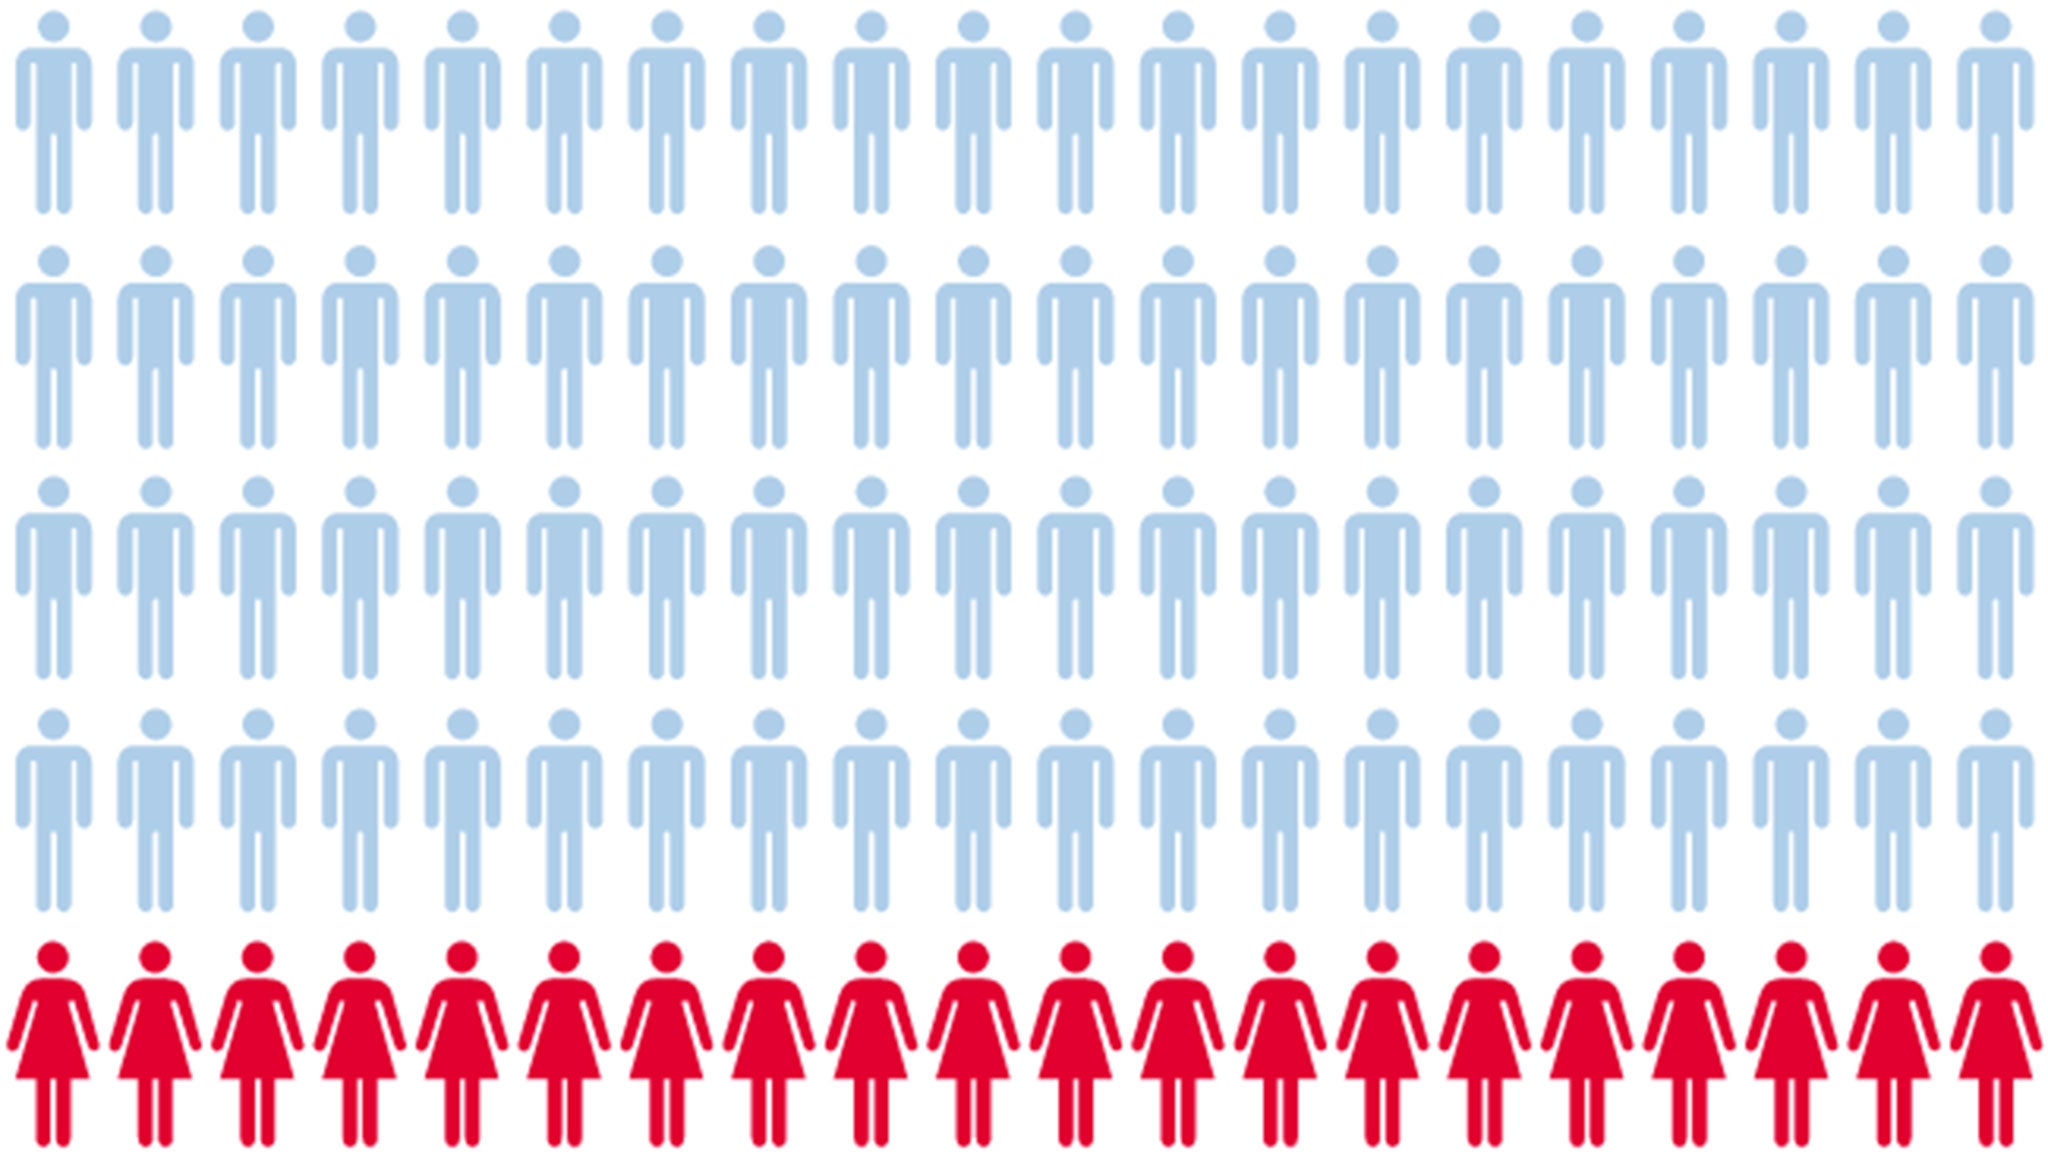 The proportion of women who hold political representation roles compared to men